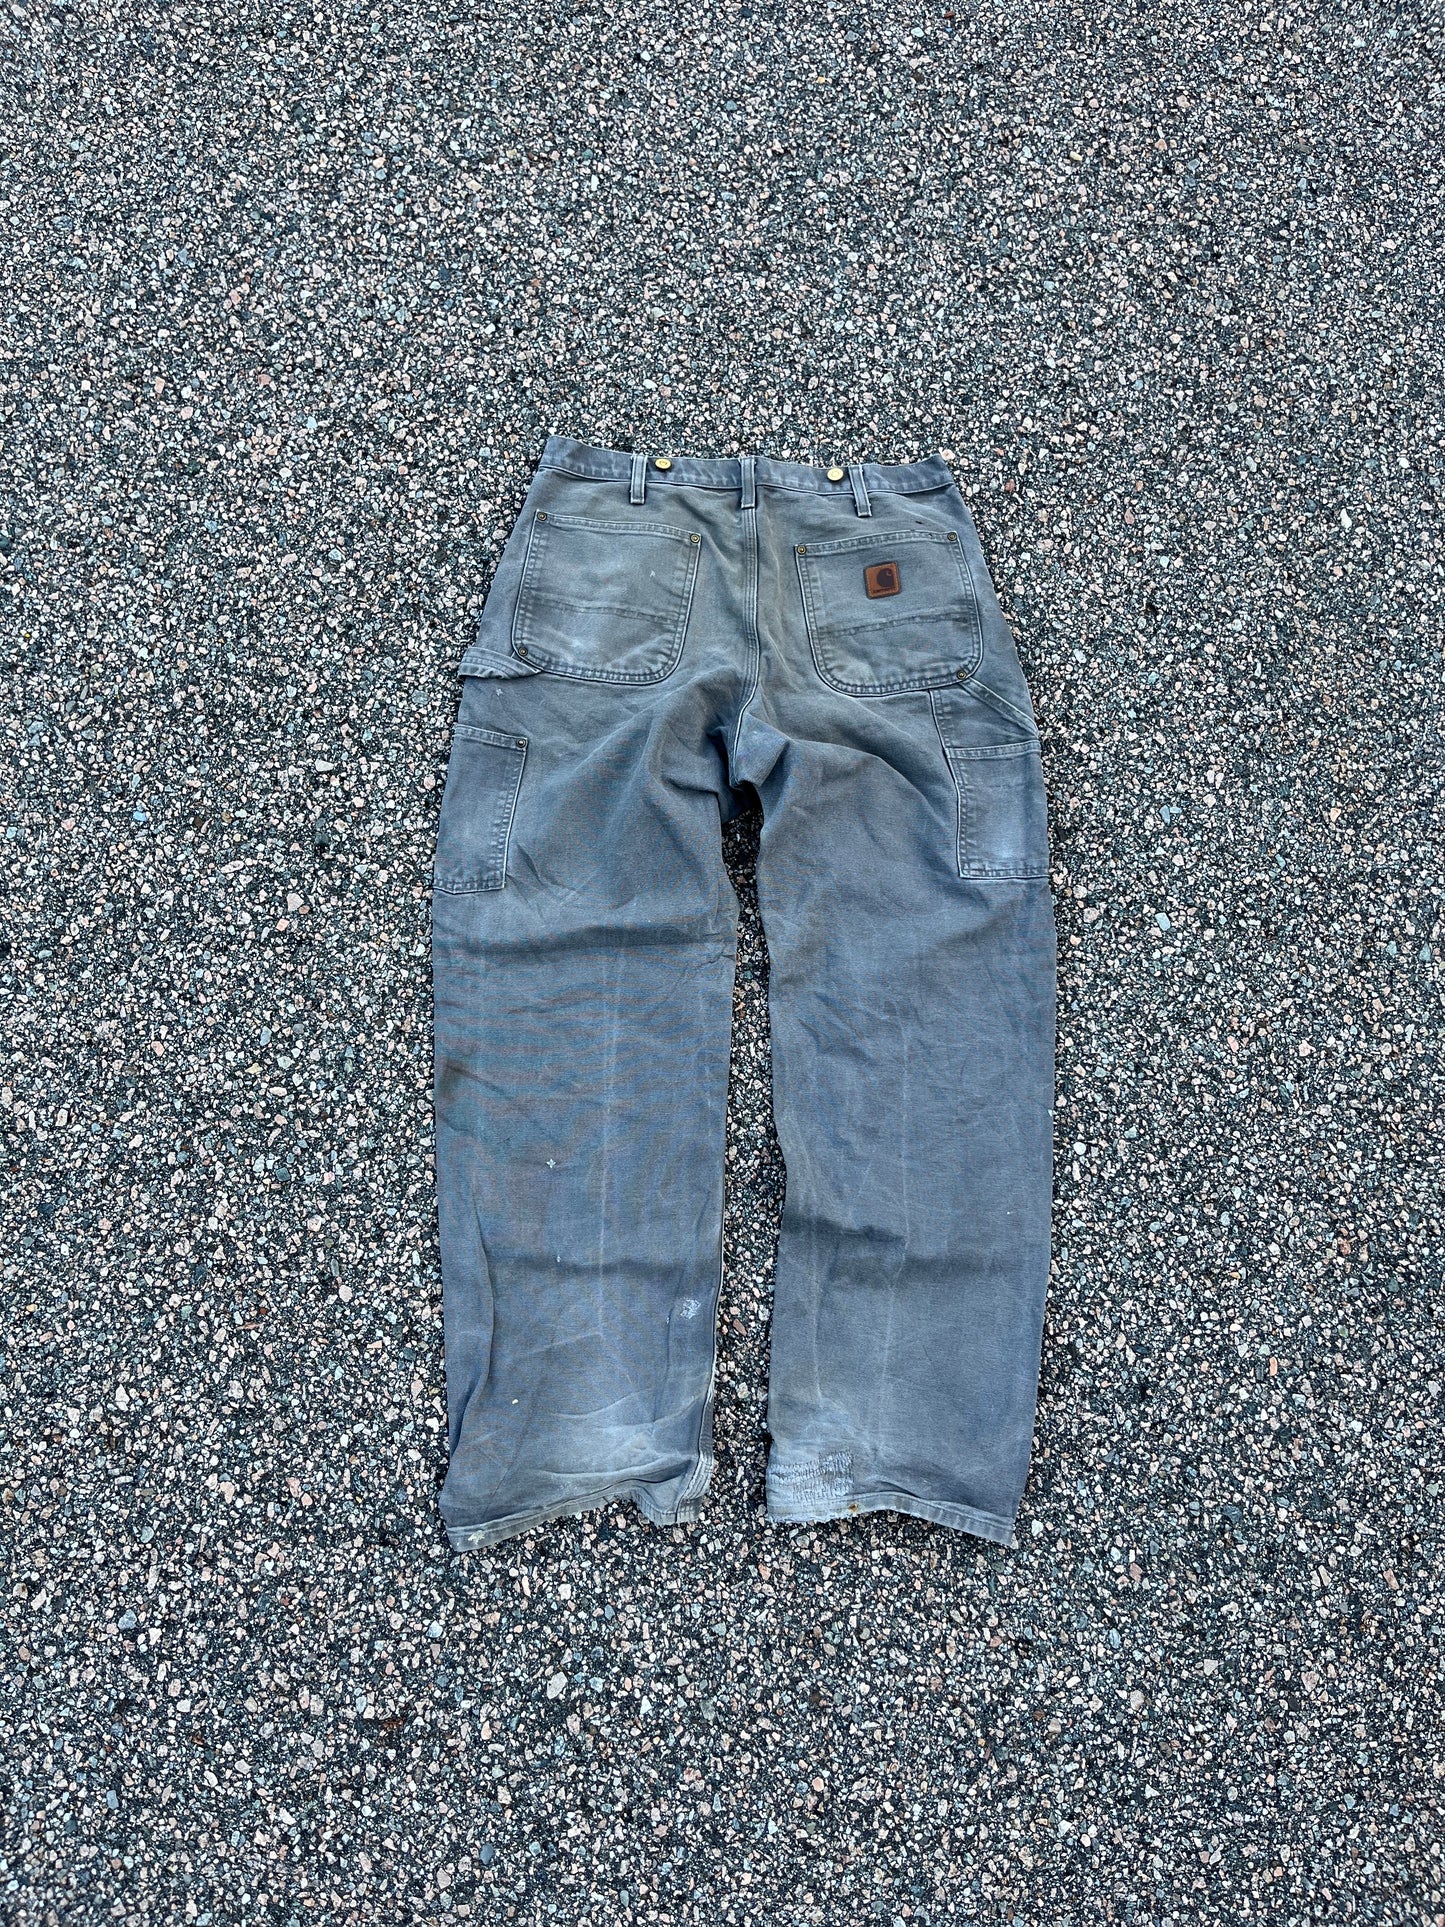 Faded Cement Grey Carhartt Double Knee Pants - 32 x 31